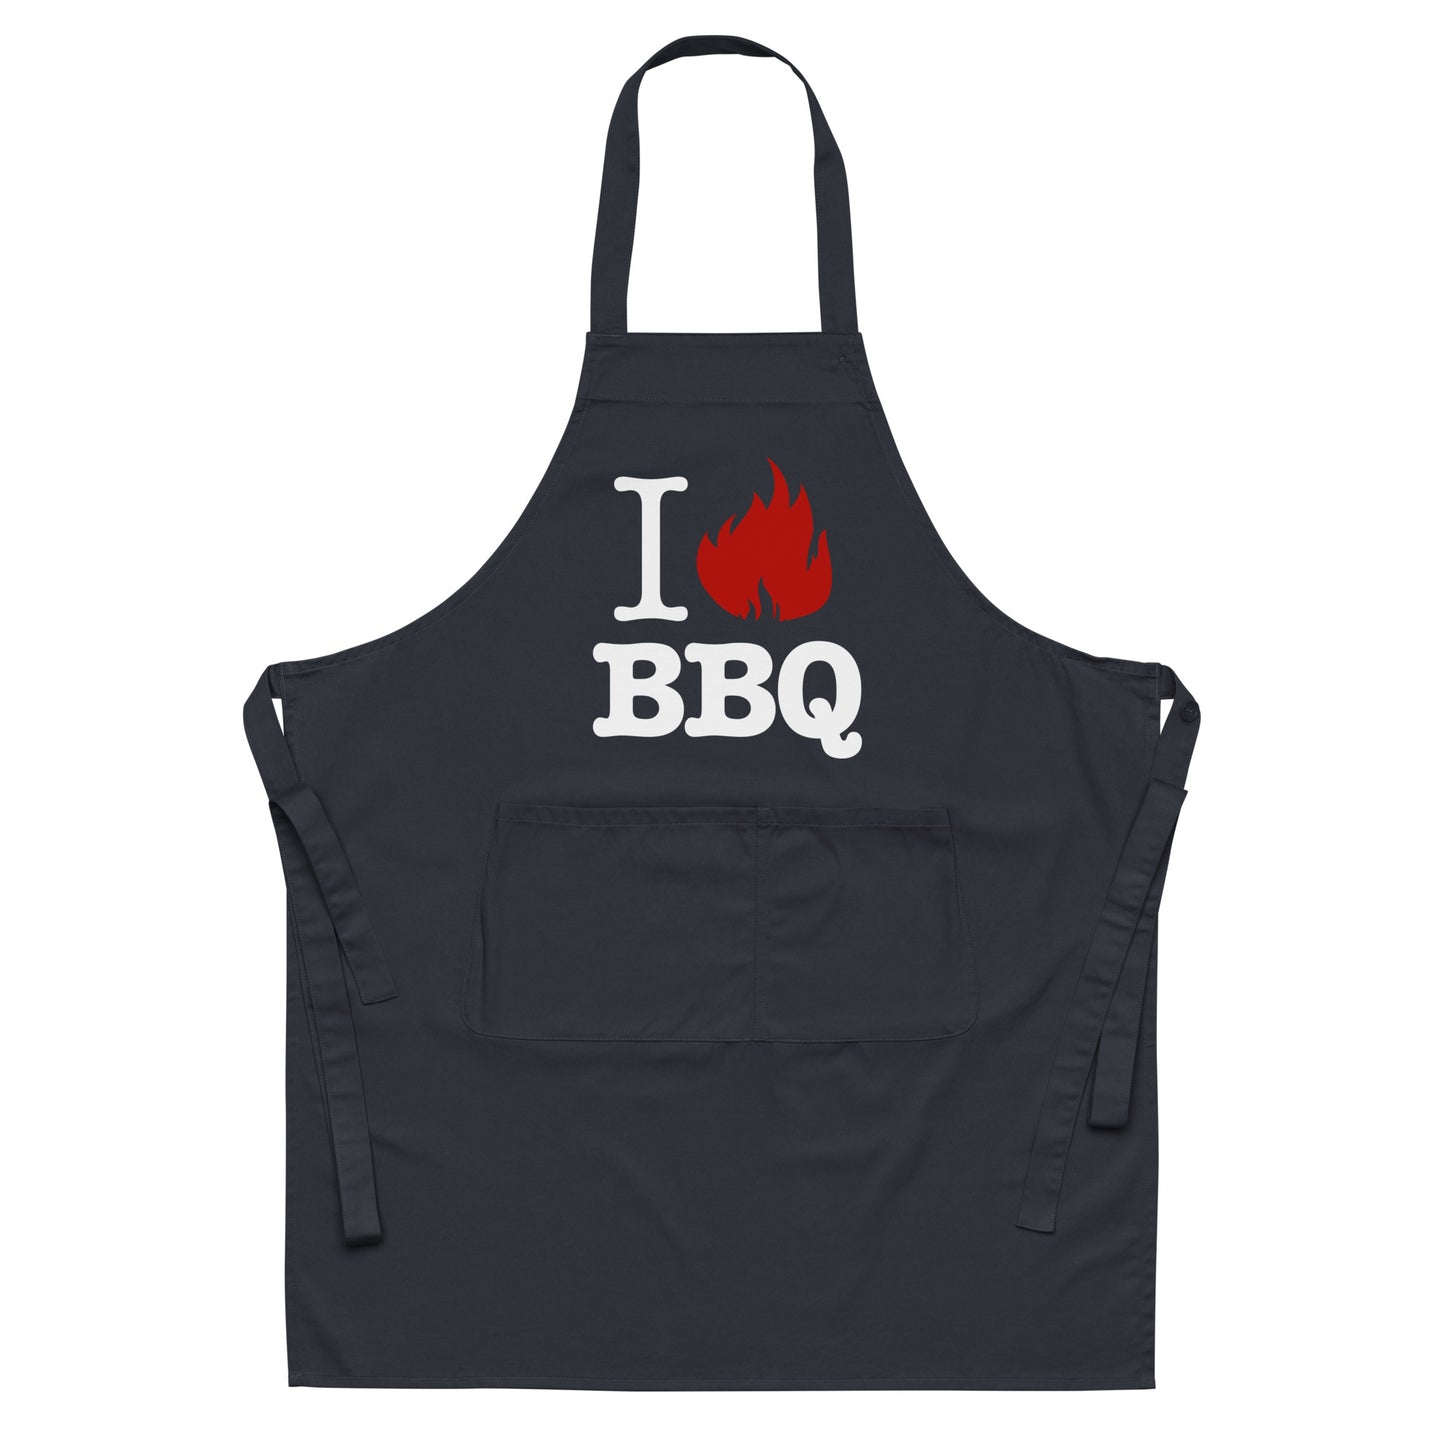 navy blue apron with text "I love BBQ"